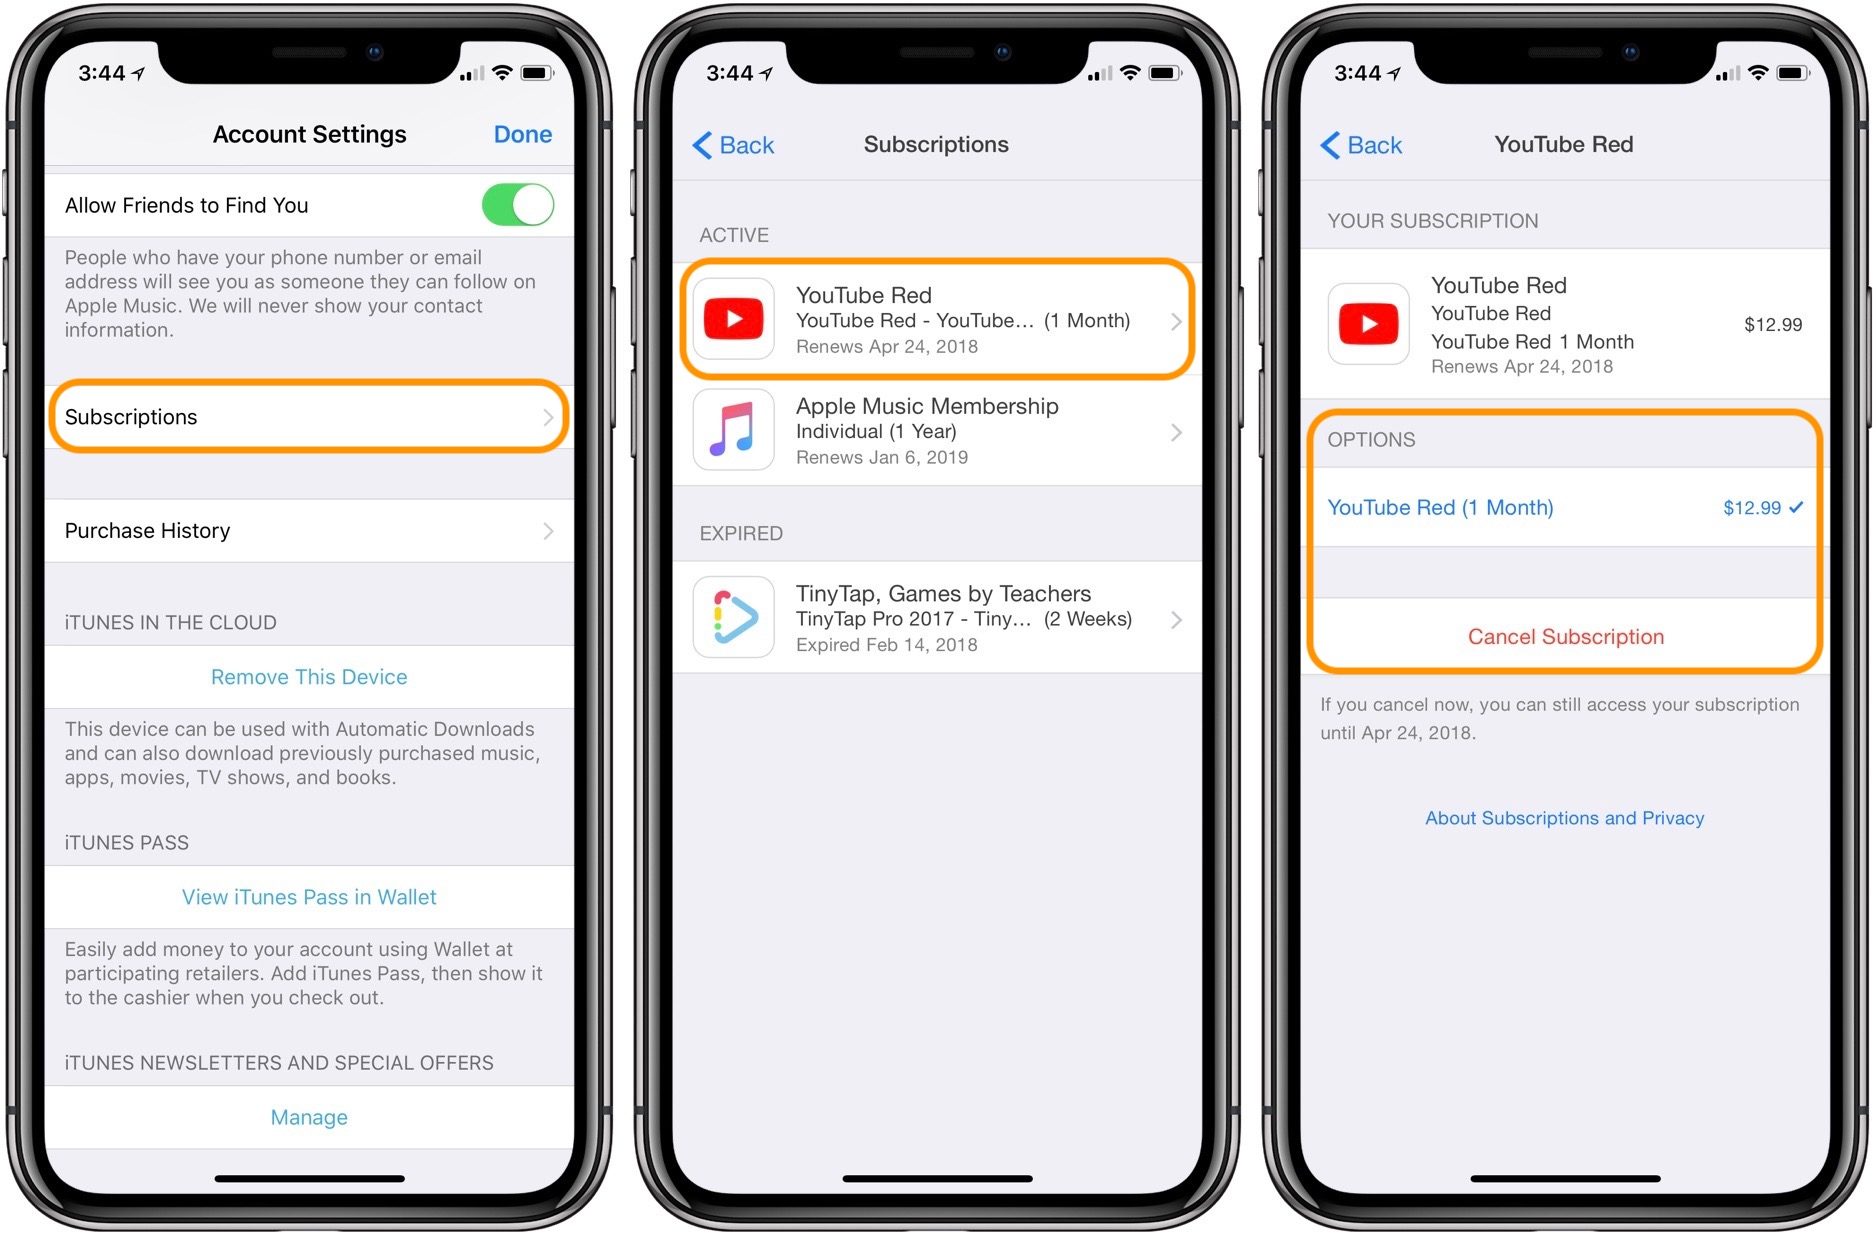 How to Cancel and View Apple Subscriptions in iOS11?